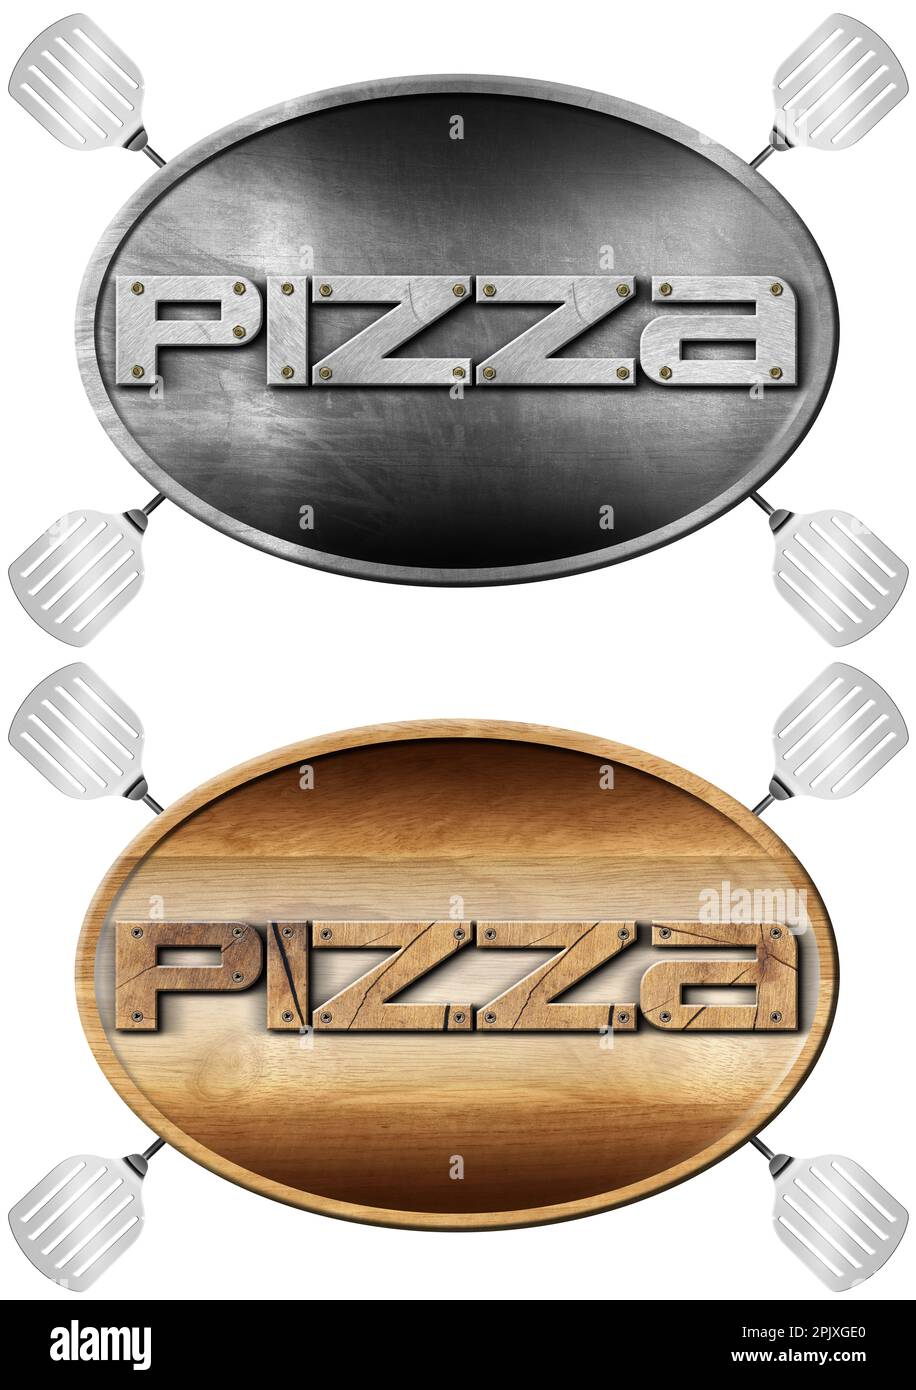 Metallic and wooden symbol with text Pizza and four spatulas, isolated on white background. 3D illustration. Pizzeria logo. Stock Photo